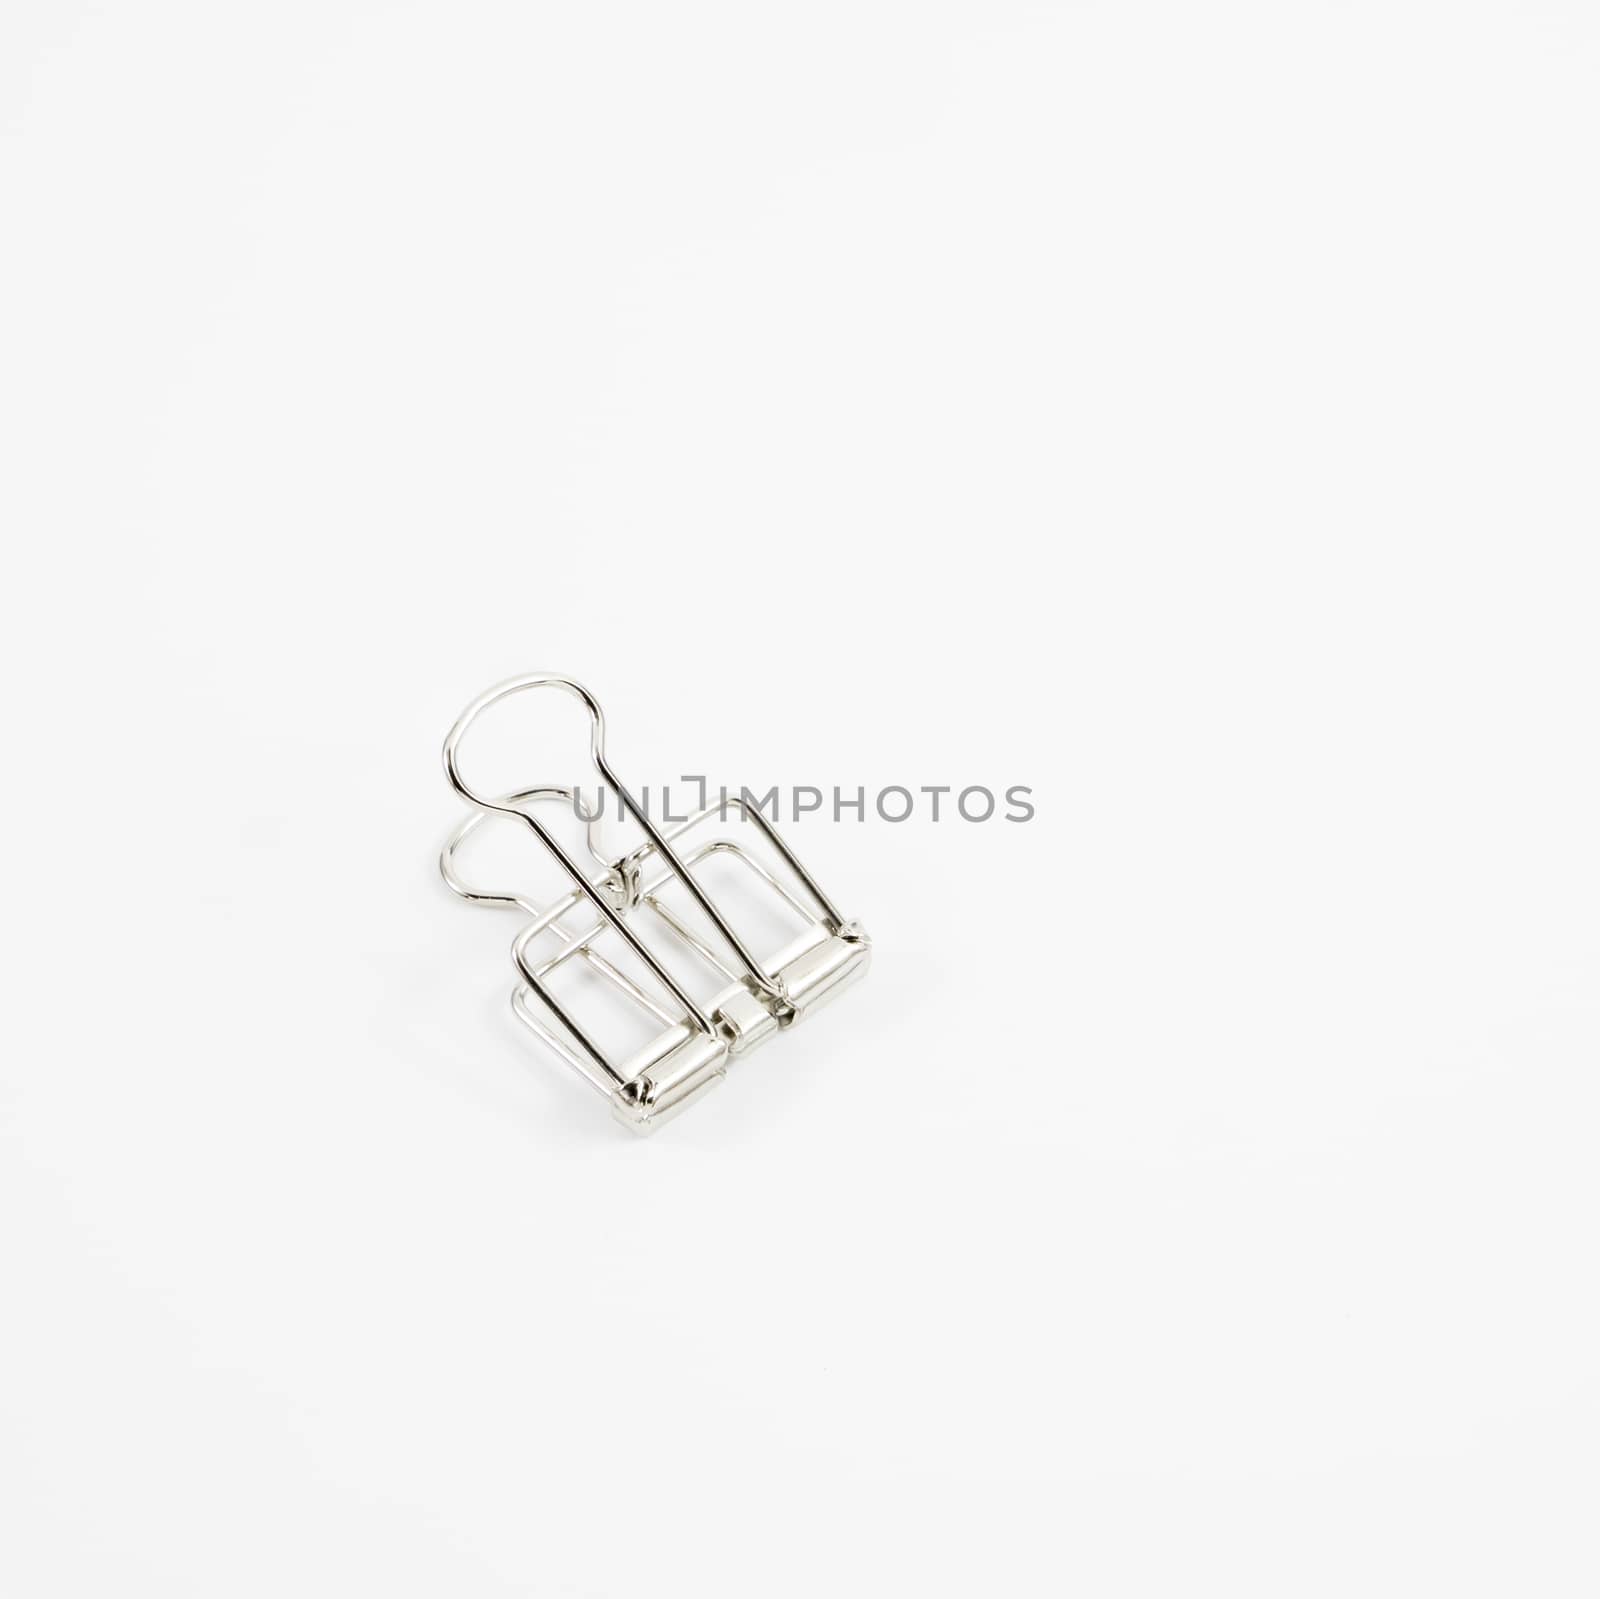 The silver binder clip (paper clip stationery).